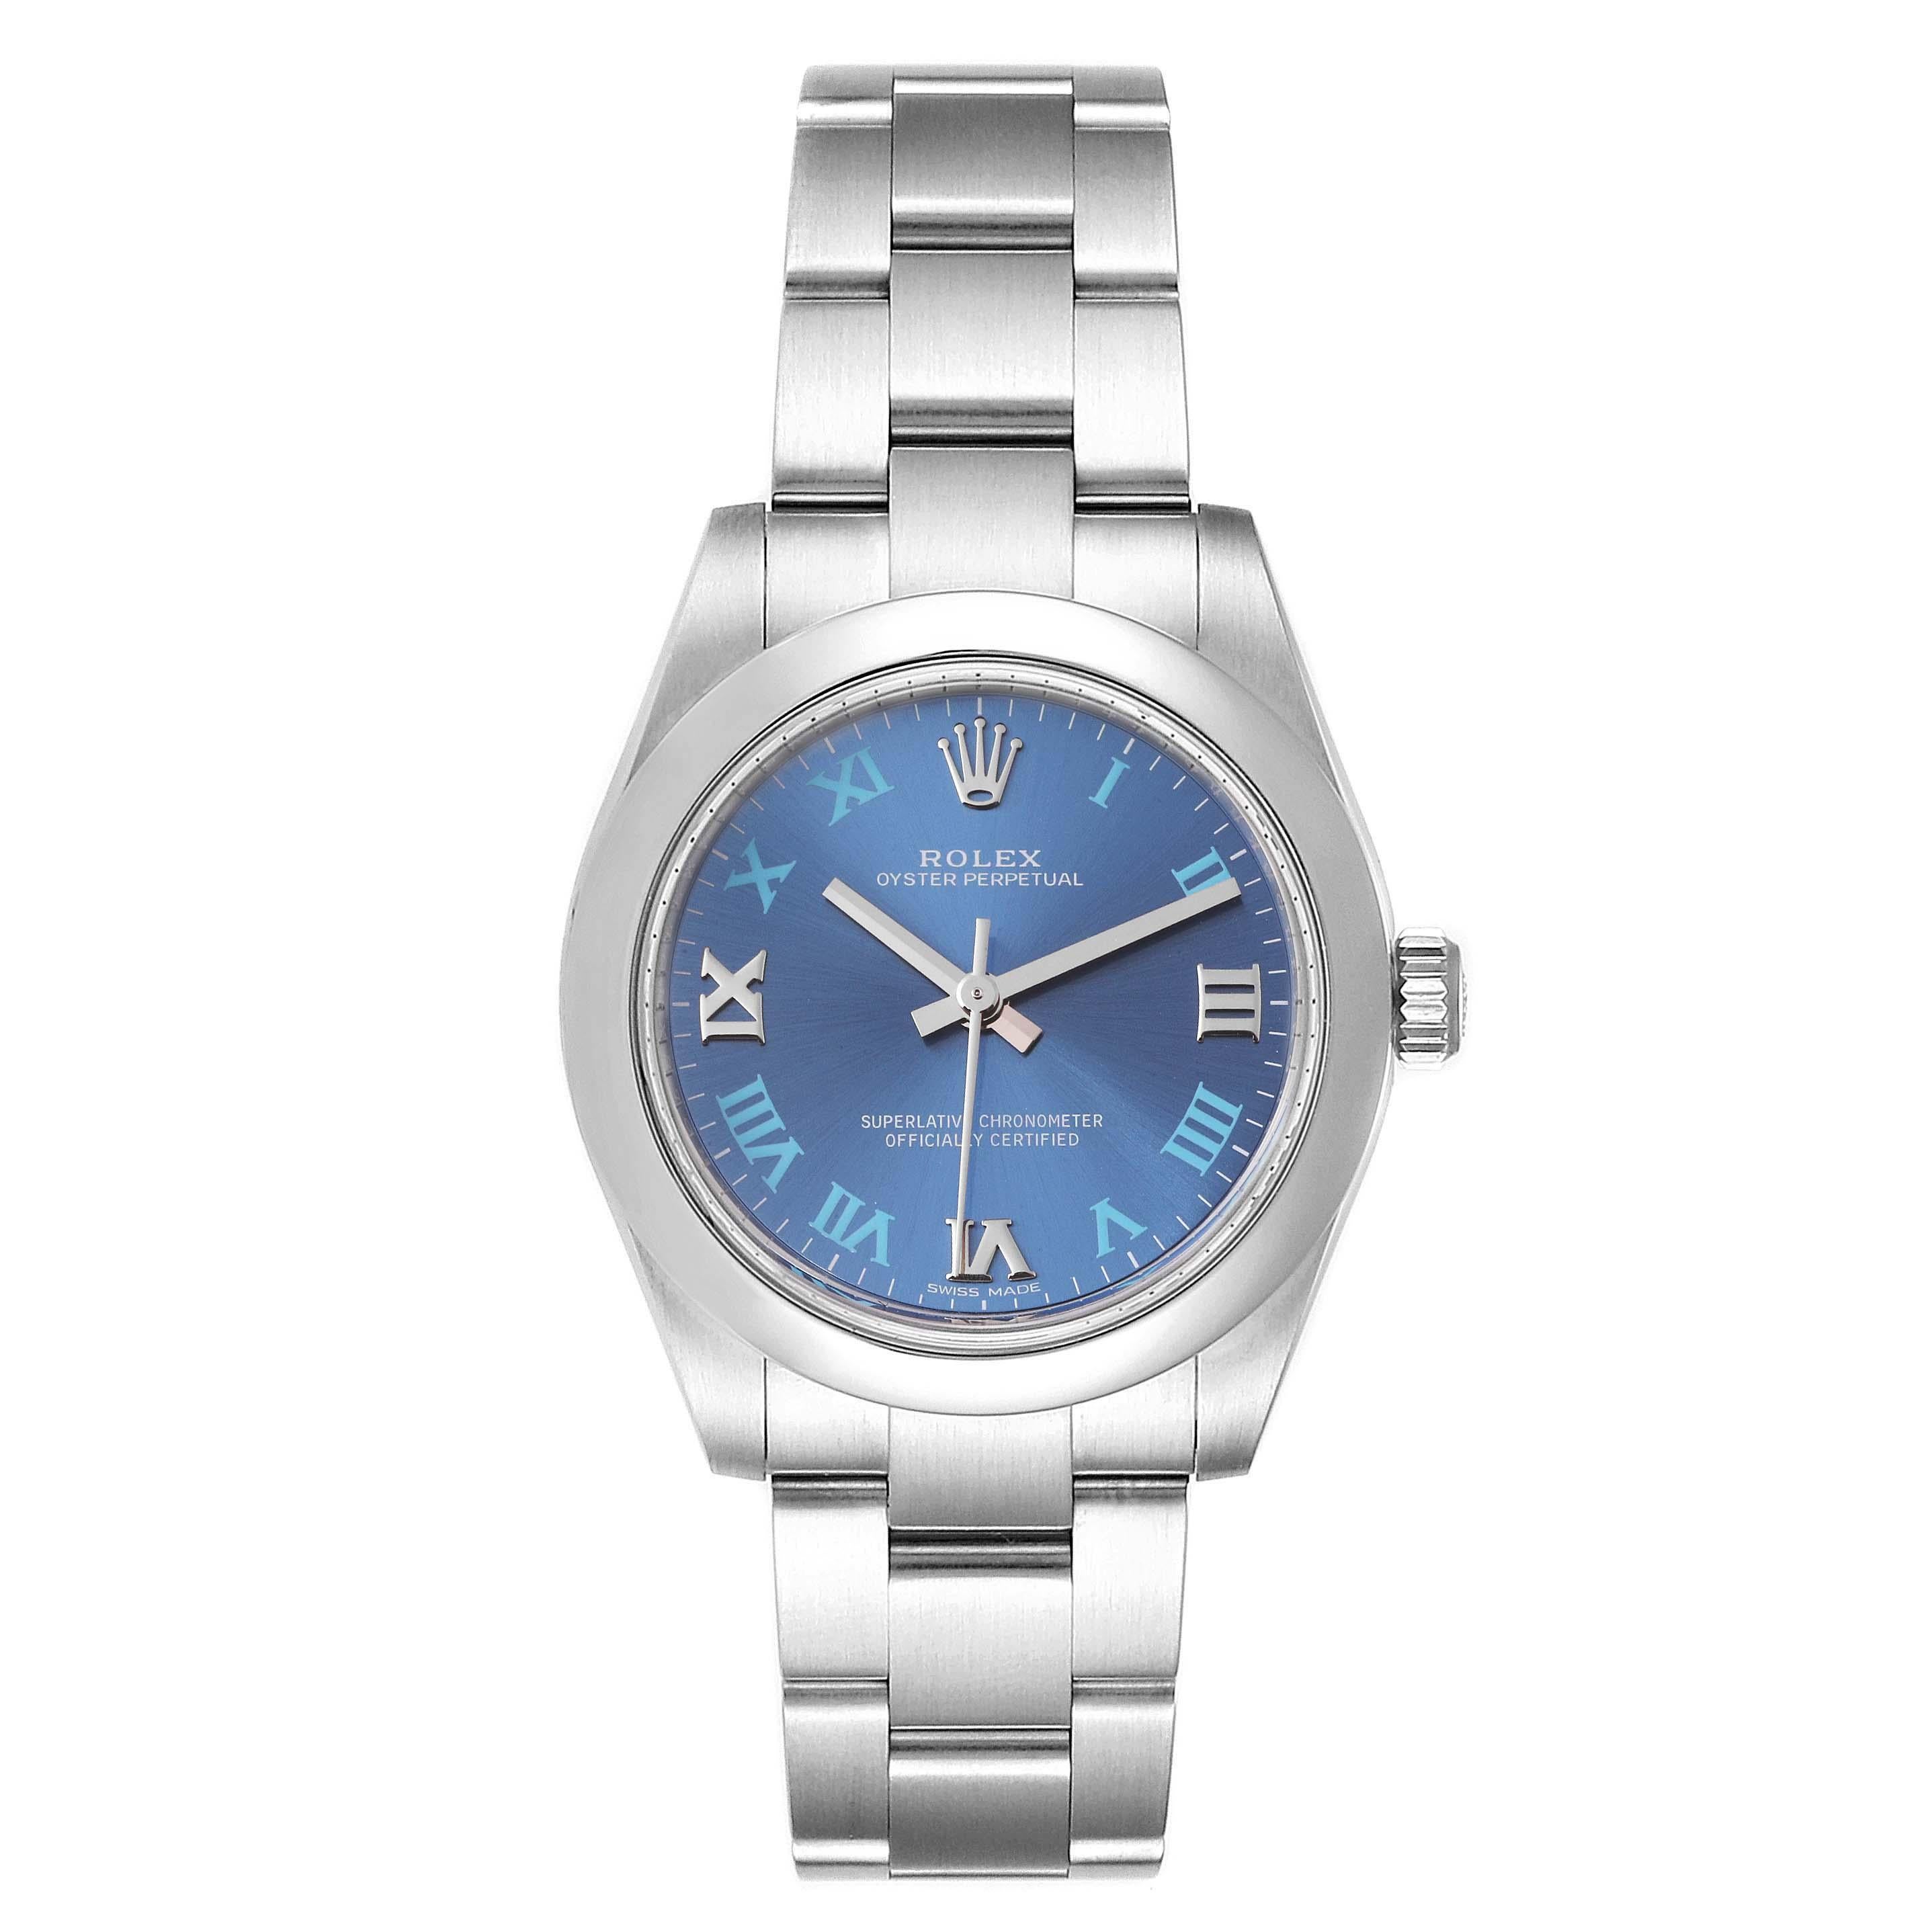 Rolex Oyster Perpetual Midsize 31 Blue Dial Ladies Watch 177200 Box Card. Officially certified chronometer self-winding movement. Stainless steel oyster case 31.0 mm in diameter. Rolex logo on a crown. Stainless steel smooth domed bezel. Scratch